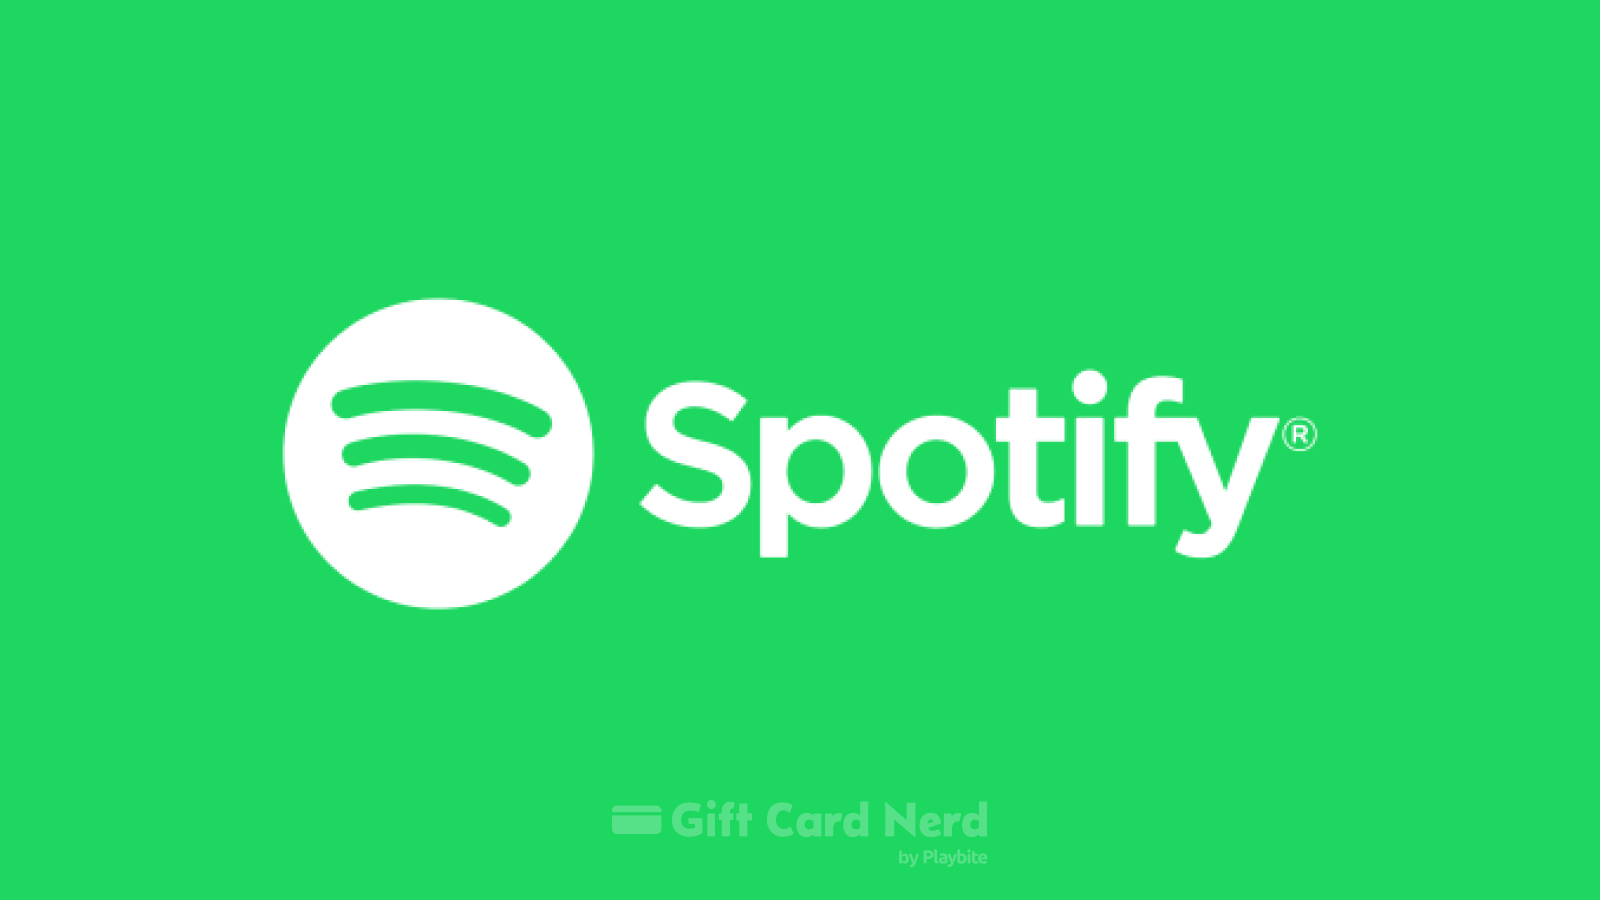 Does Amazon sell Spotify gift cards?